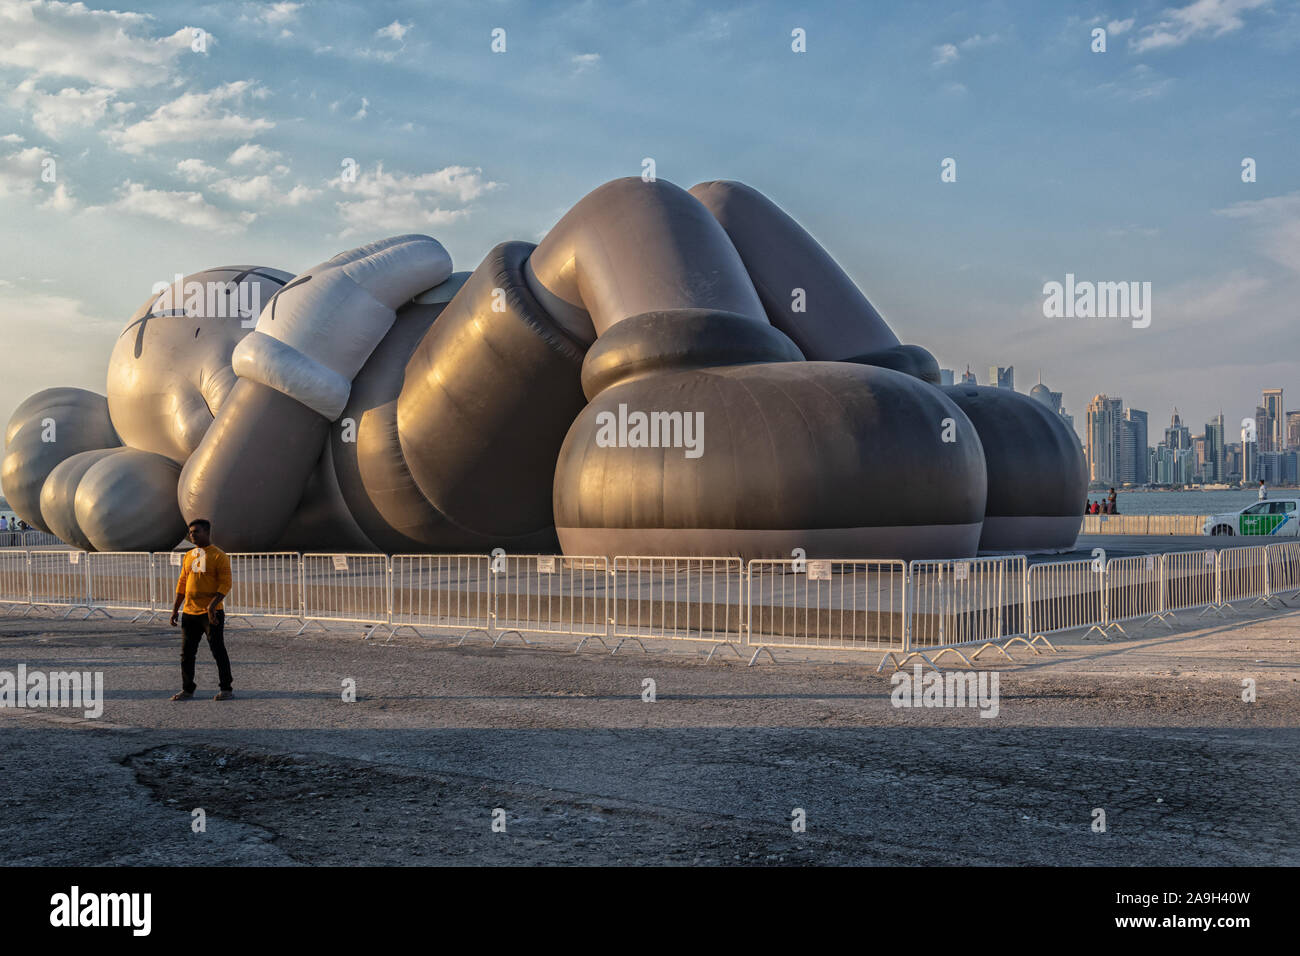 KAWS Holiday art installation in Doha Cor niche , Qatar Daylight view with clouds in sky Stock Photo